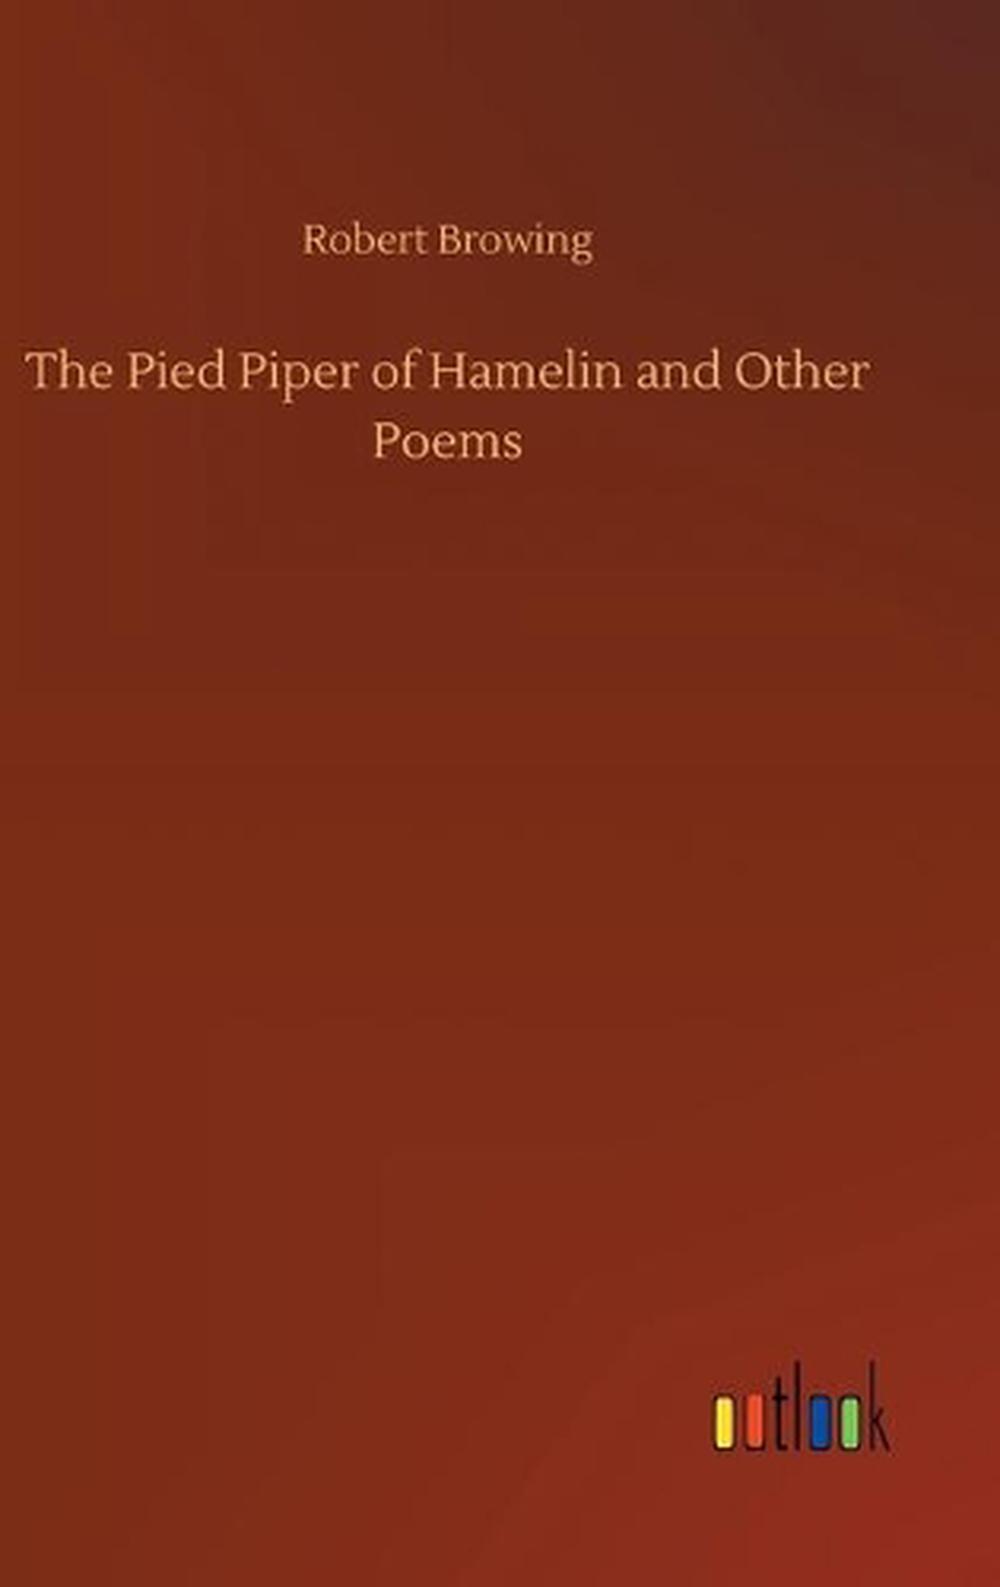 the pied piper of hamelin poem